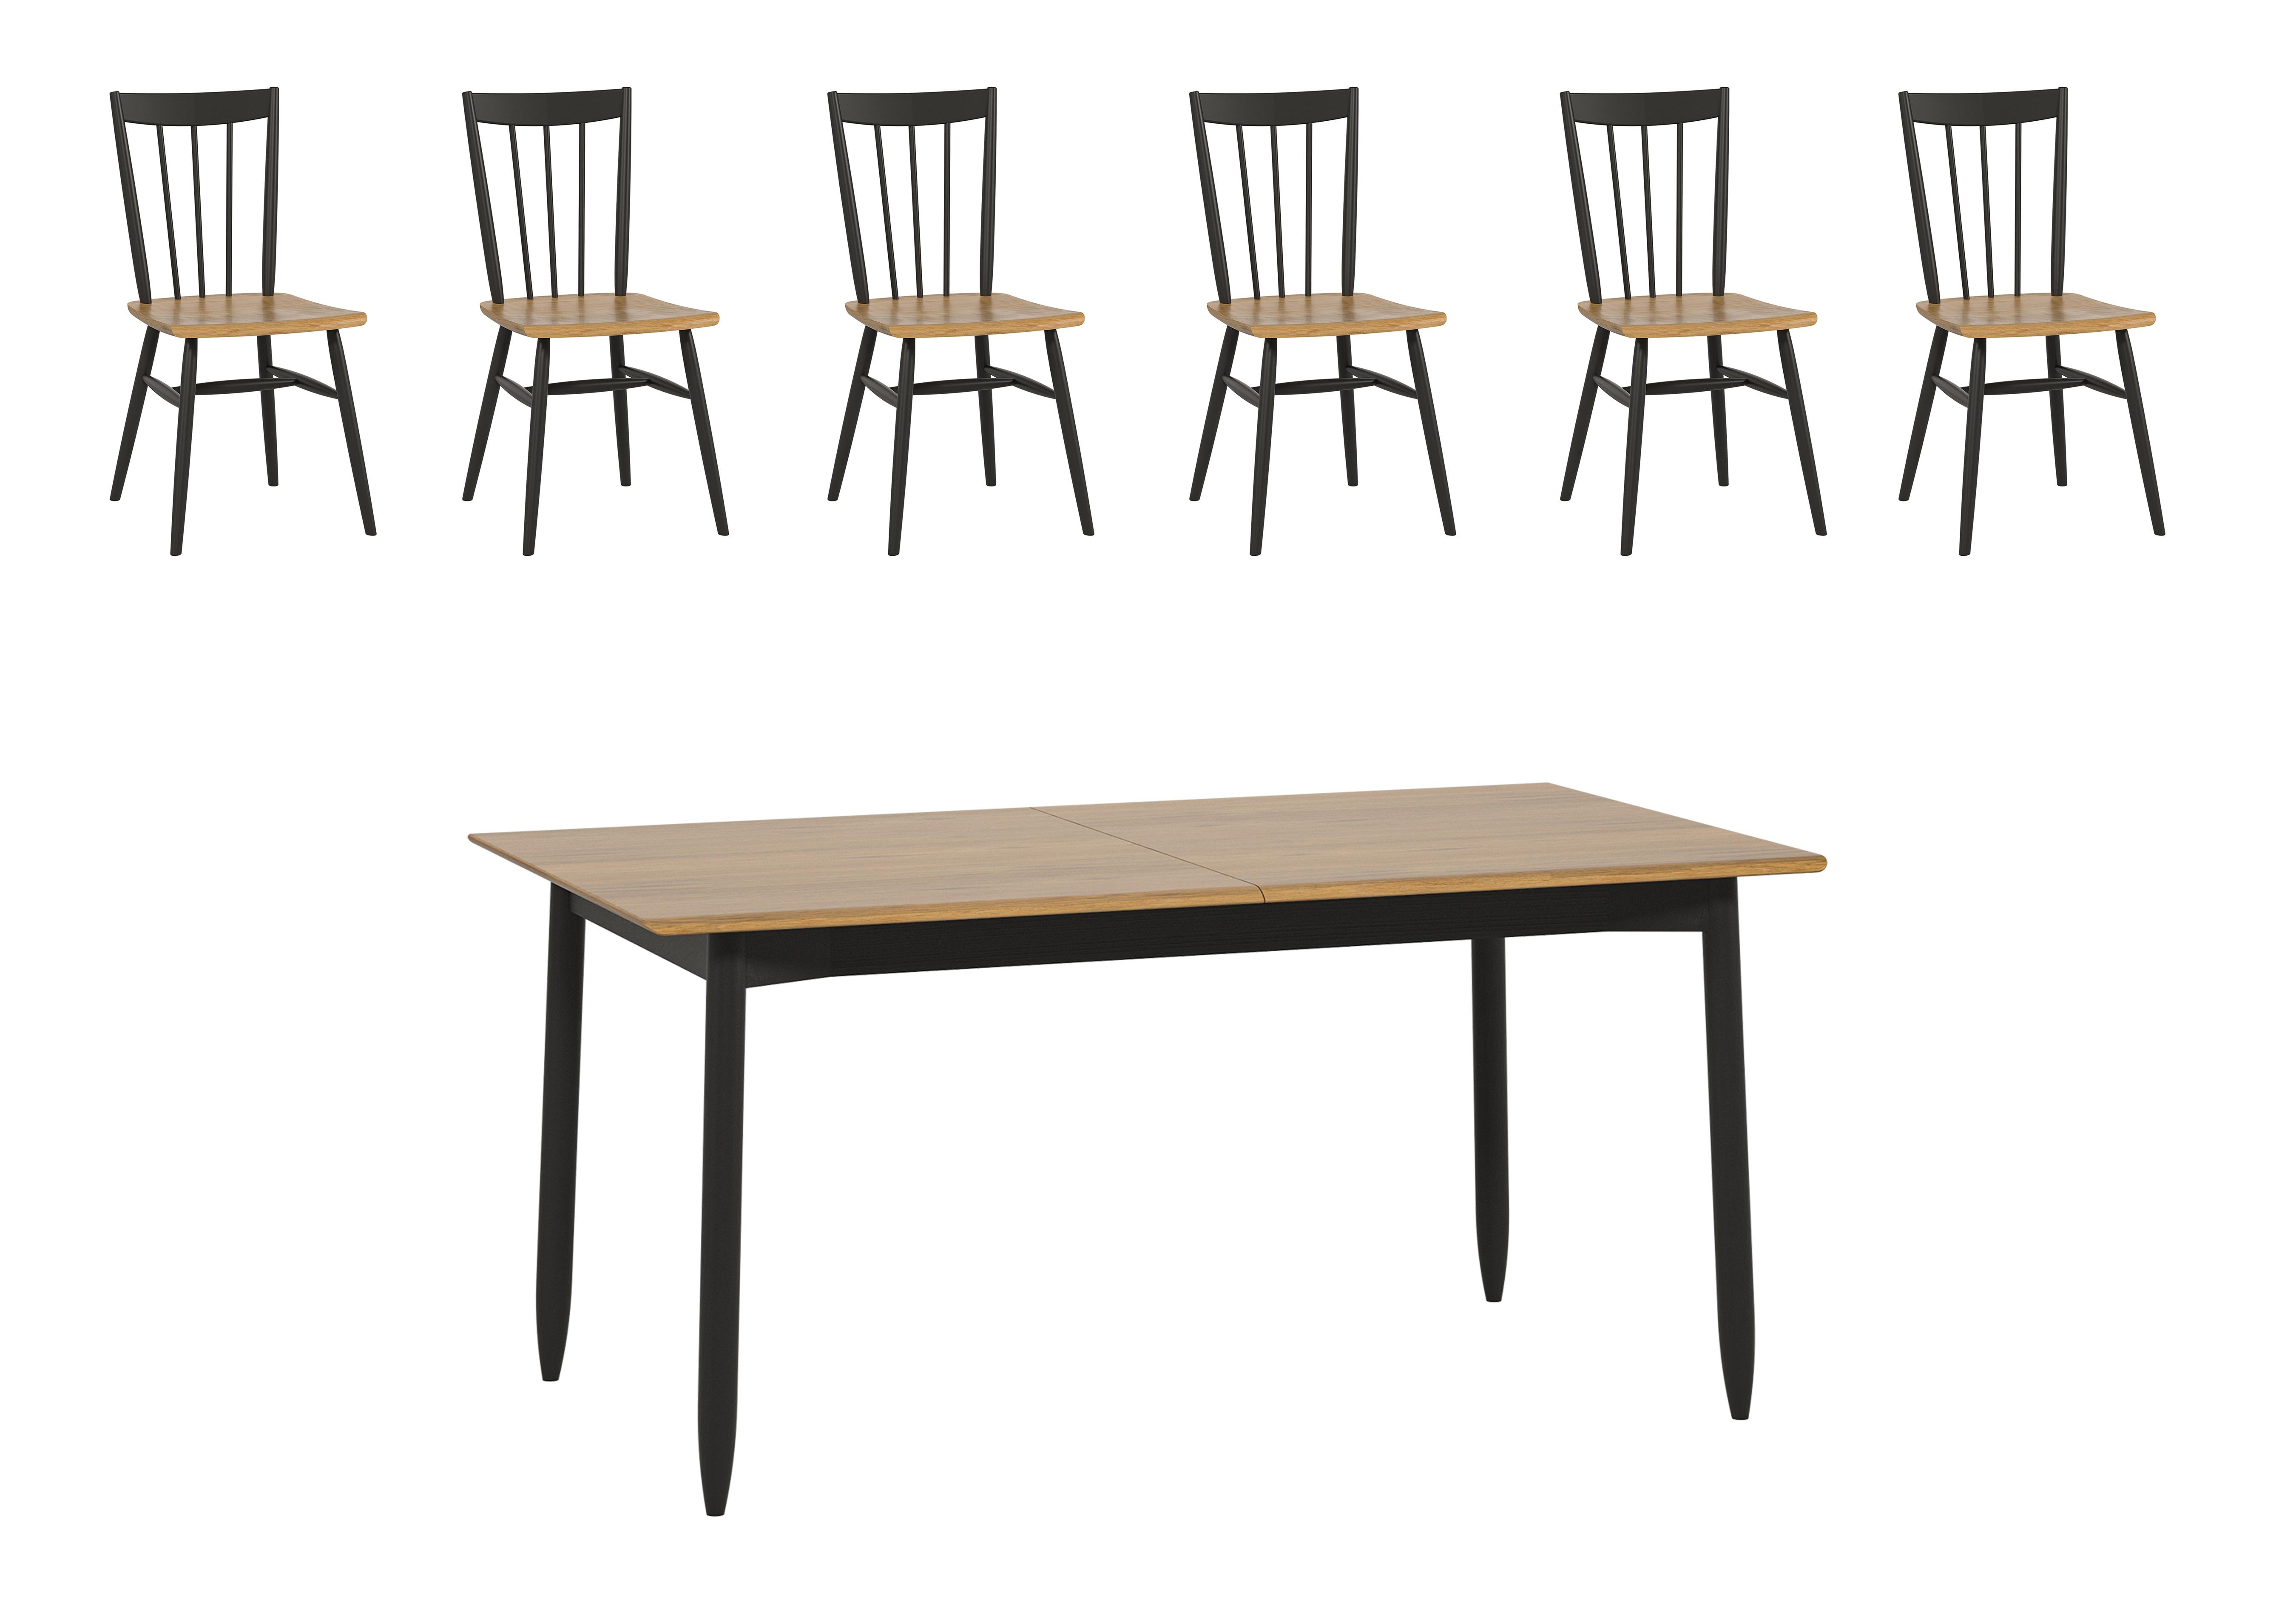 Monza Medium Extending Dining Table and 6 Dining Chairs in  on Furniture Village